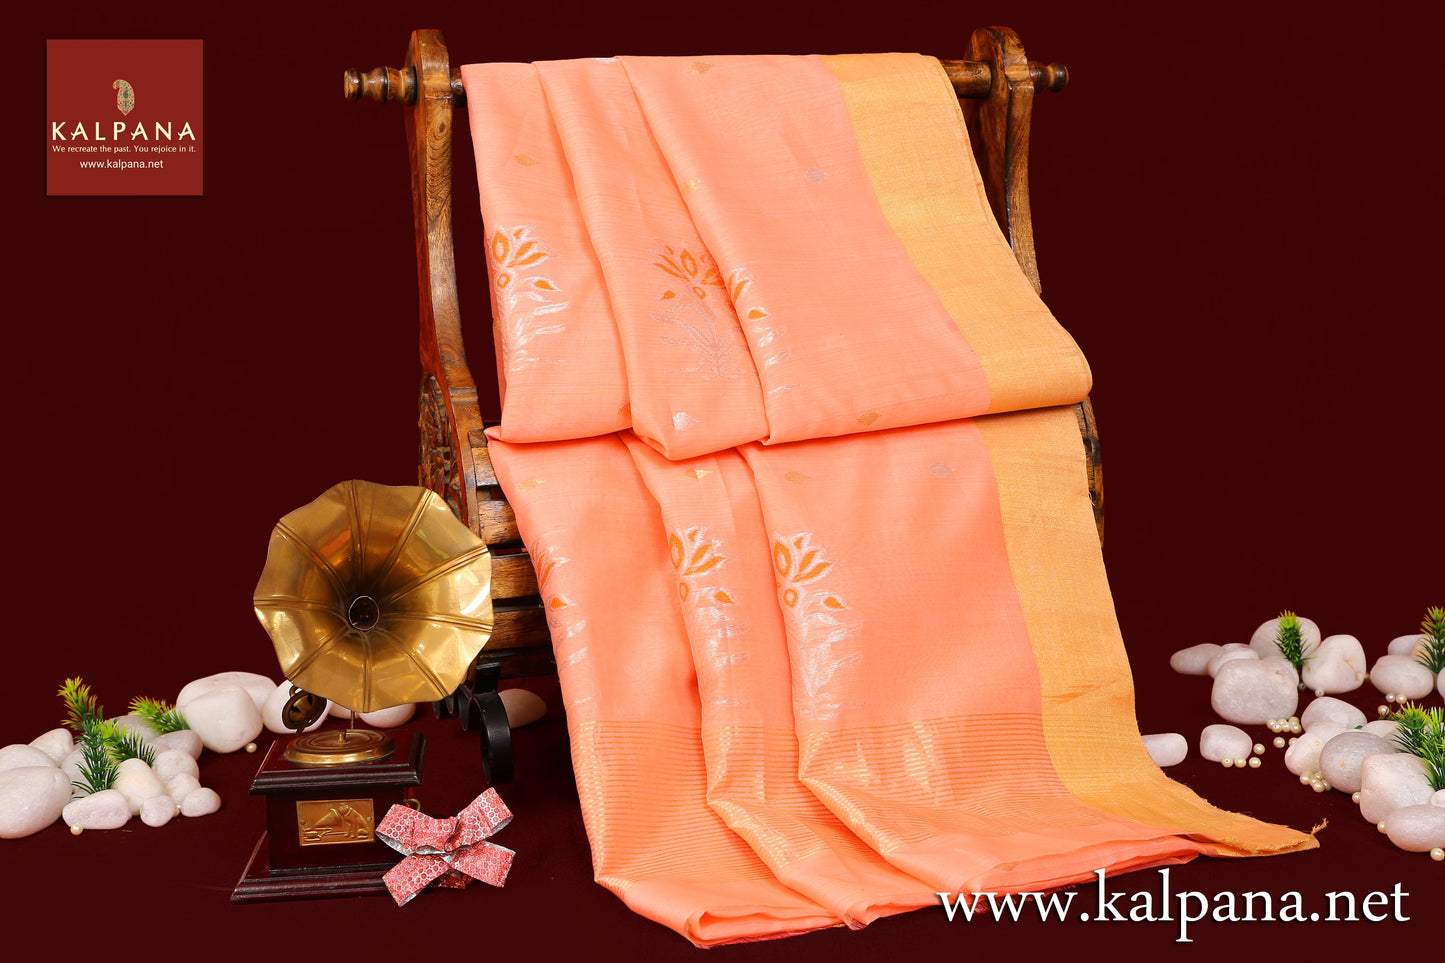 Chanderi Handloom Pure Cotton Saree with All Over Motifs and Woven Zari Border. The Palla is  Woven Zari. It comes with Self Colored Plain Unstitched Blouse with Zari Border. Perfect for Semi Formal Wear.  Recommended for Summer season(s). Dry Clean Only